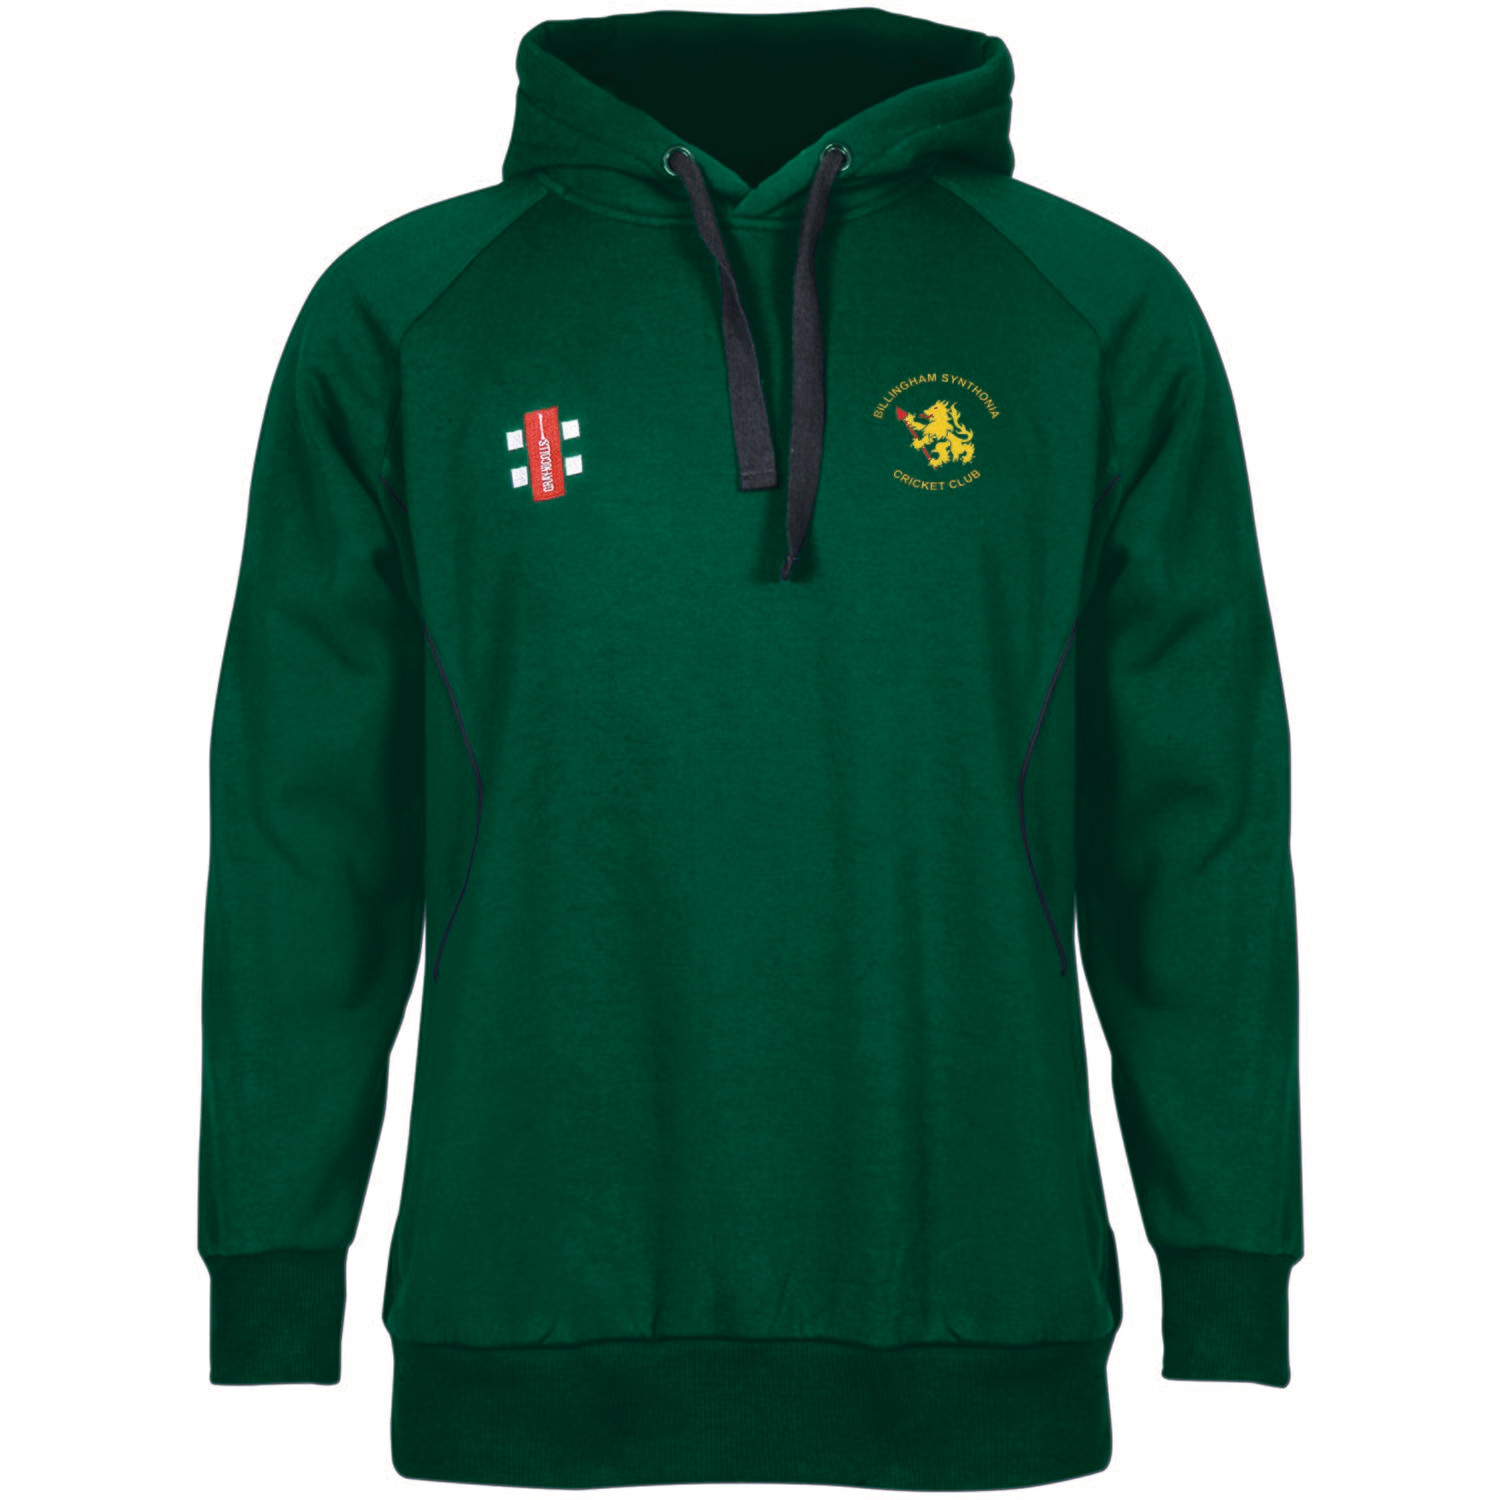 Billingham Synthonia Storm Hooded Top